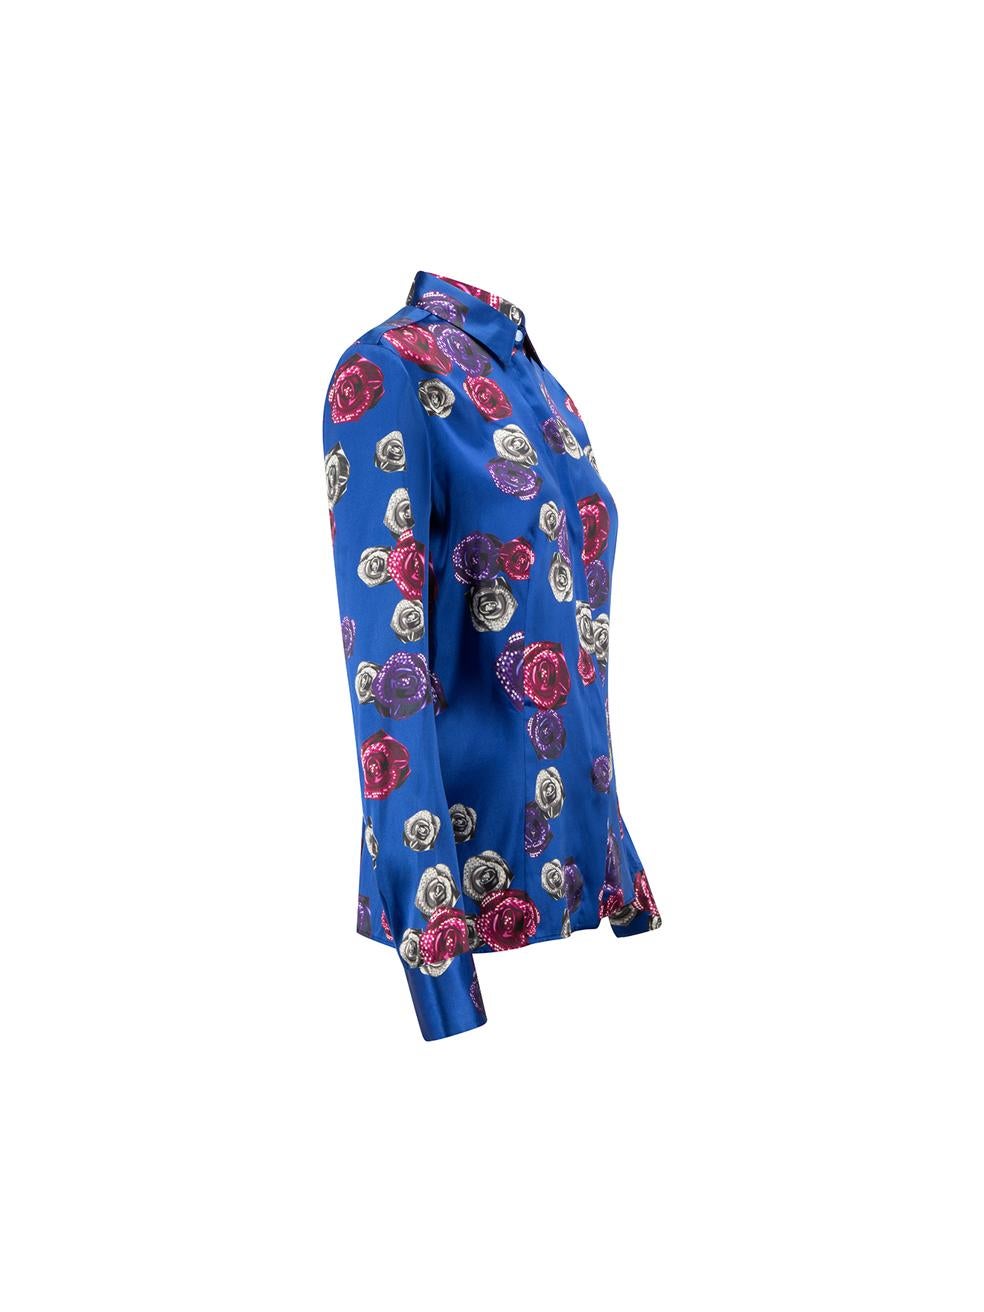 CONDITION is Very good. Minimal wear to shirt is evident. Minimal wear to the front-left and both underarms with light marks to the satin on this used Gianni Versace designer resale item.



Details


Blue

Silk

Blouse

Multicoloured floral